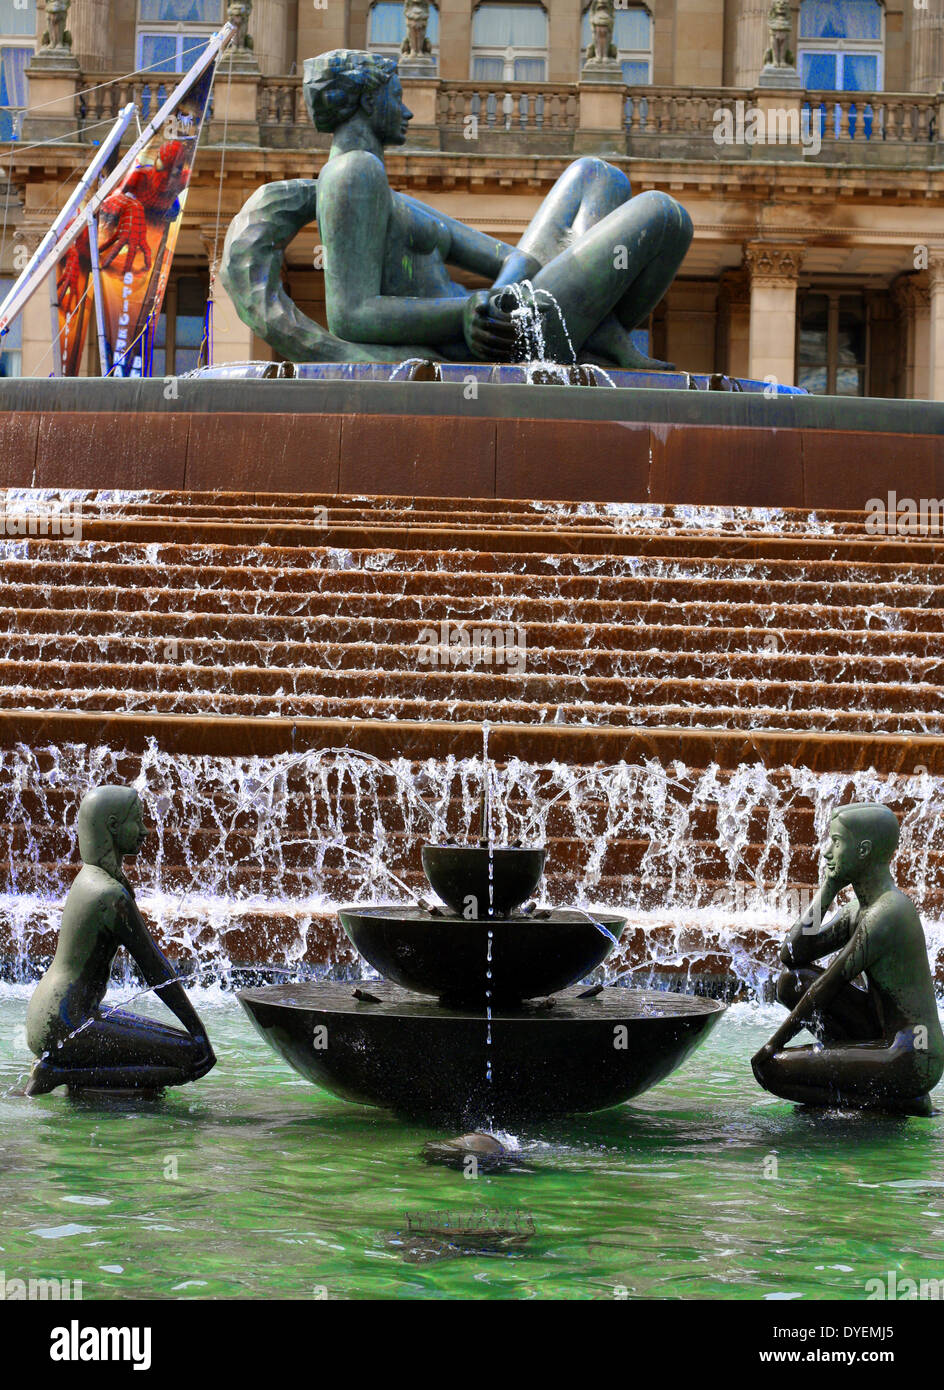 Fountain in Victoria Square, Birmingham, England.  statues and fountain represent youth . This bronze sculpture,  is 1.5 m (5 ft) tall and 1.5 m (5 ft) in diameter. It depicts a boy and a girl facing each other at either ends of a fountain. Beside them are an egg and a cone Stock Photo